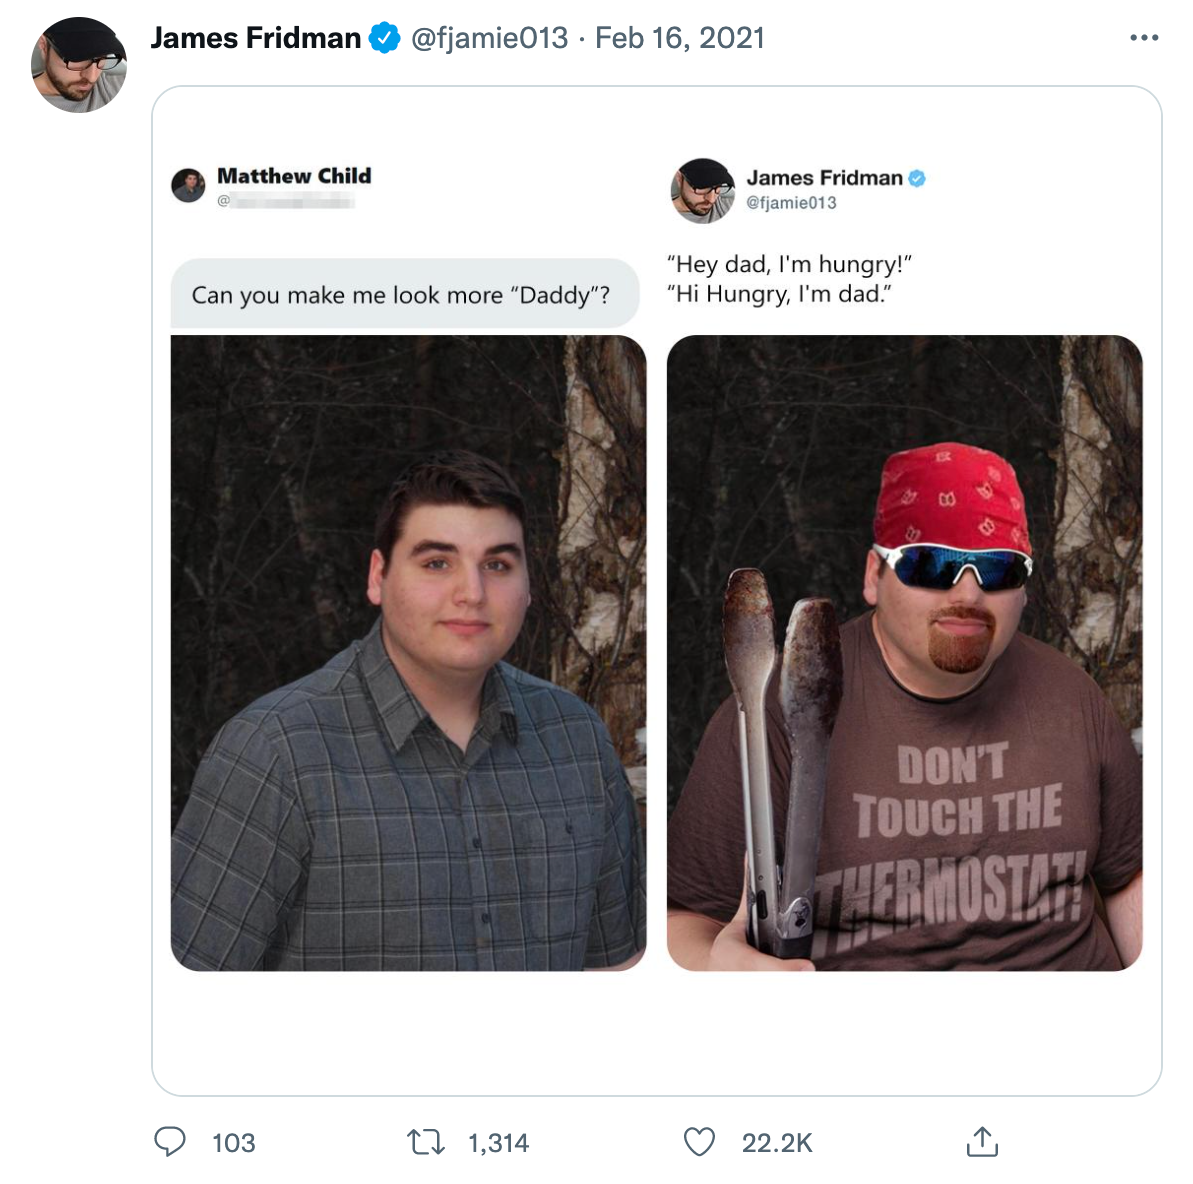 wholesome photoshop edits - sunglasses - James Fridman O Matthew Child Can you make me look more "Daddy"? 103 t 1,314 James Fridman "Hey dad, I'm hungry!" "Hi Hungry, I'm dad." Don'T Touch The Thermostat I